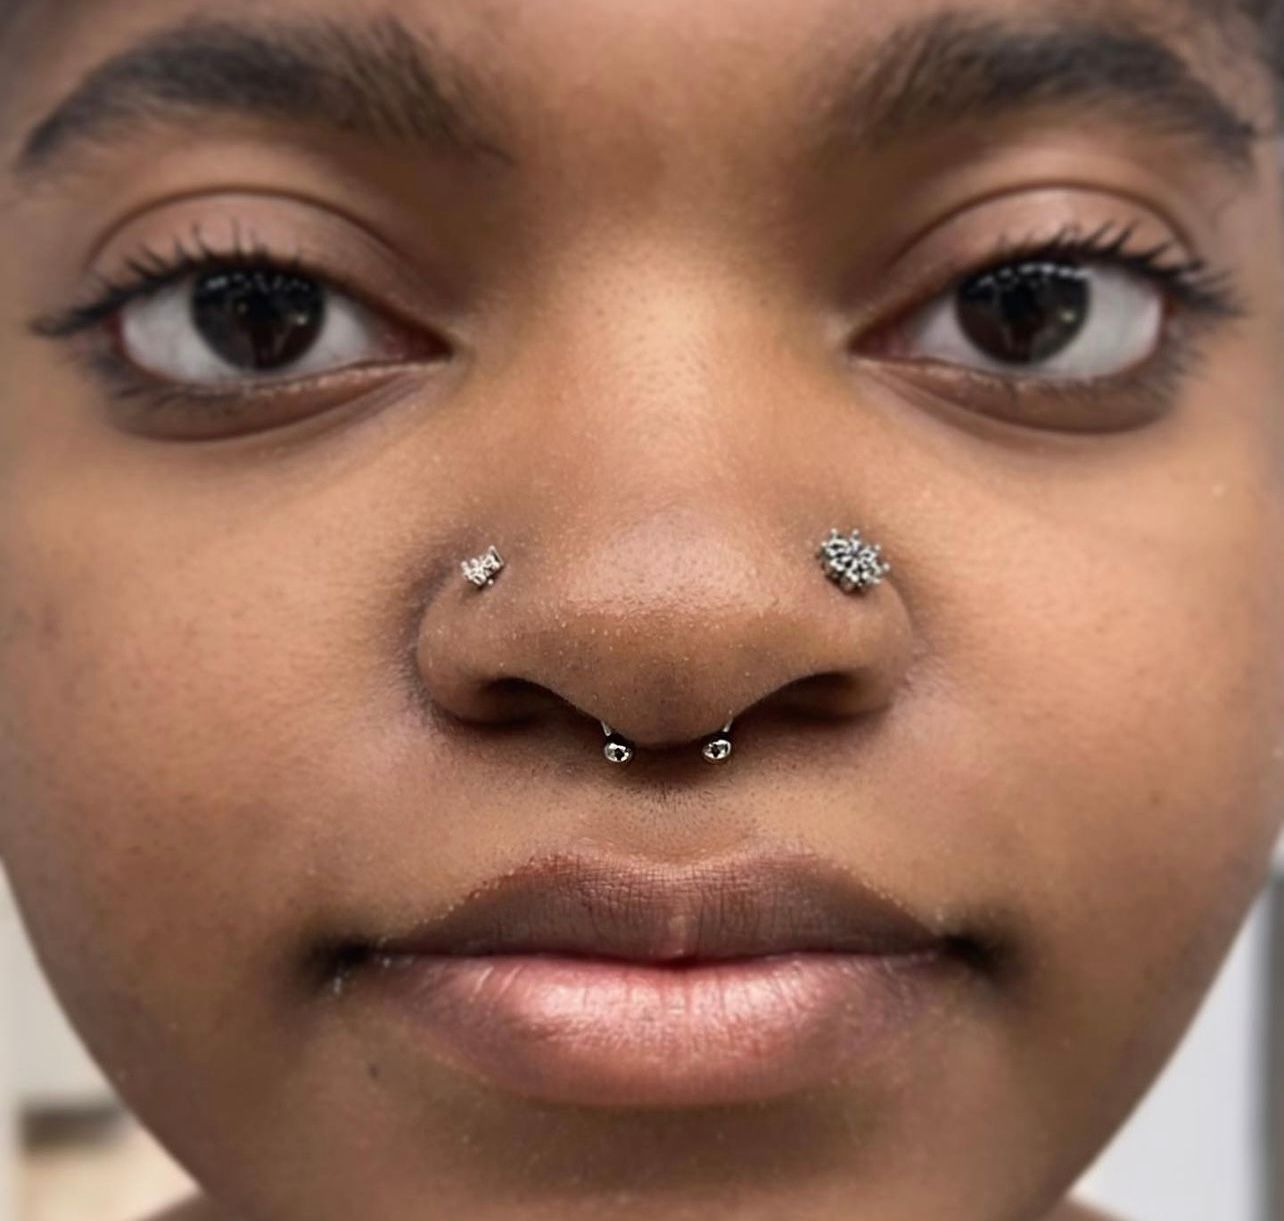 a close up of a woman 's face with a nose ring